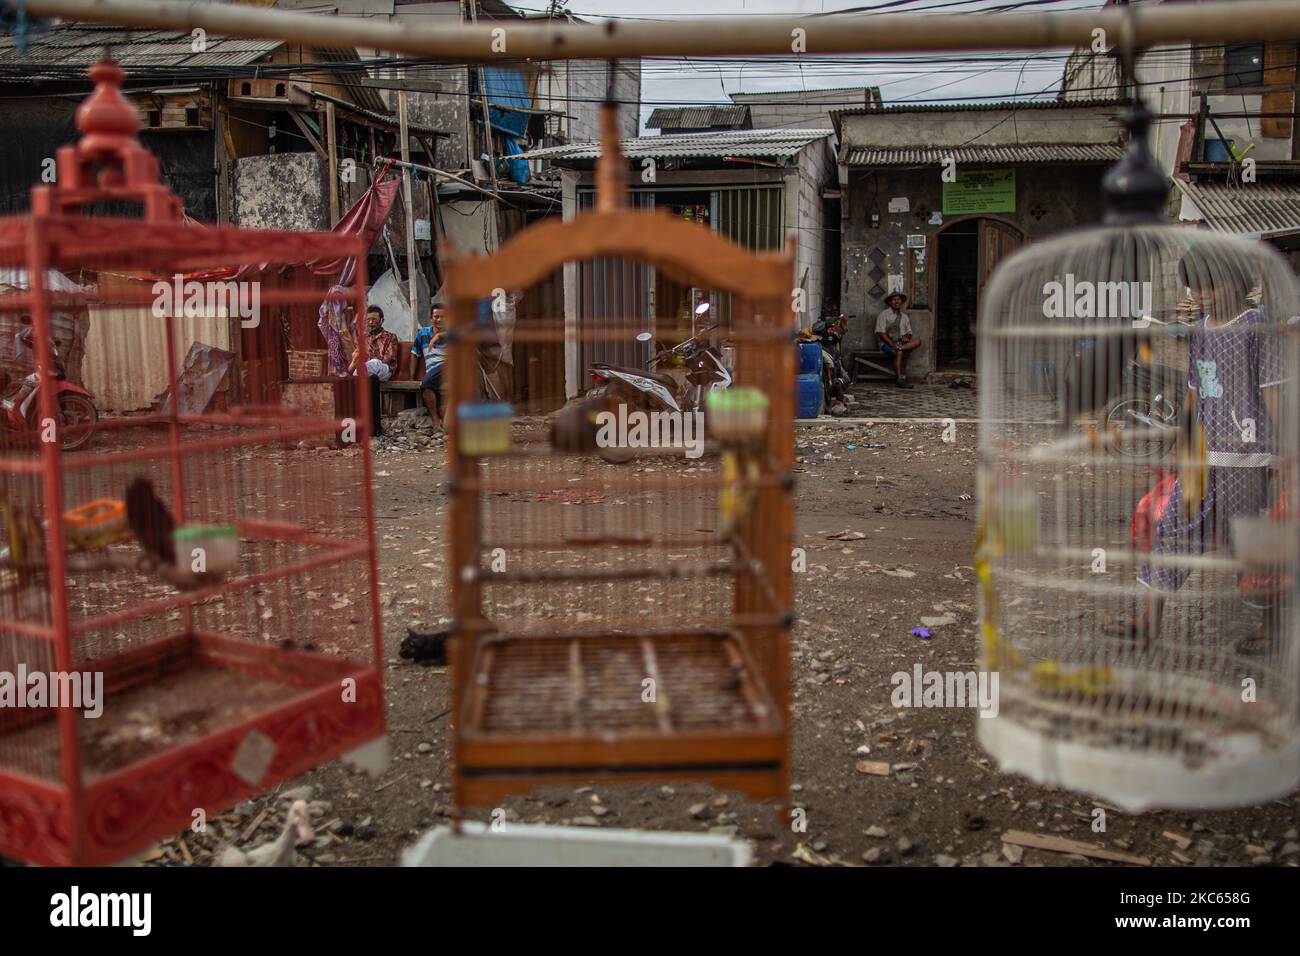 Bird cages in a slum, Jakarta on December 19, 2020. Indonesia has recorded more than 2,500 coronavirus-related deaths in the last 18 days and is bracing for more deaths in the next few weeks, while newly confirmed cases are also rising at an unprecedented rate. (Photo by Afriadi Hikmal/NurPhoto) Stock Photo